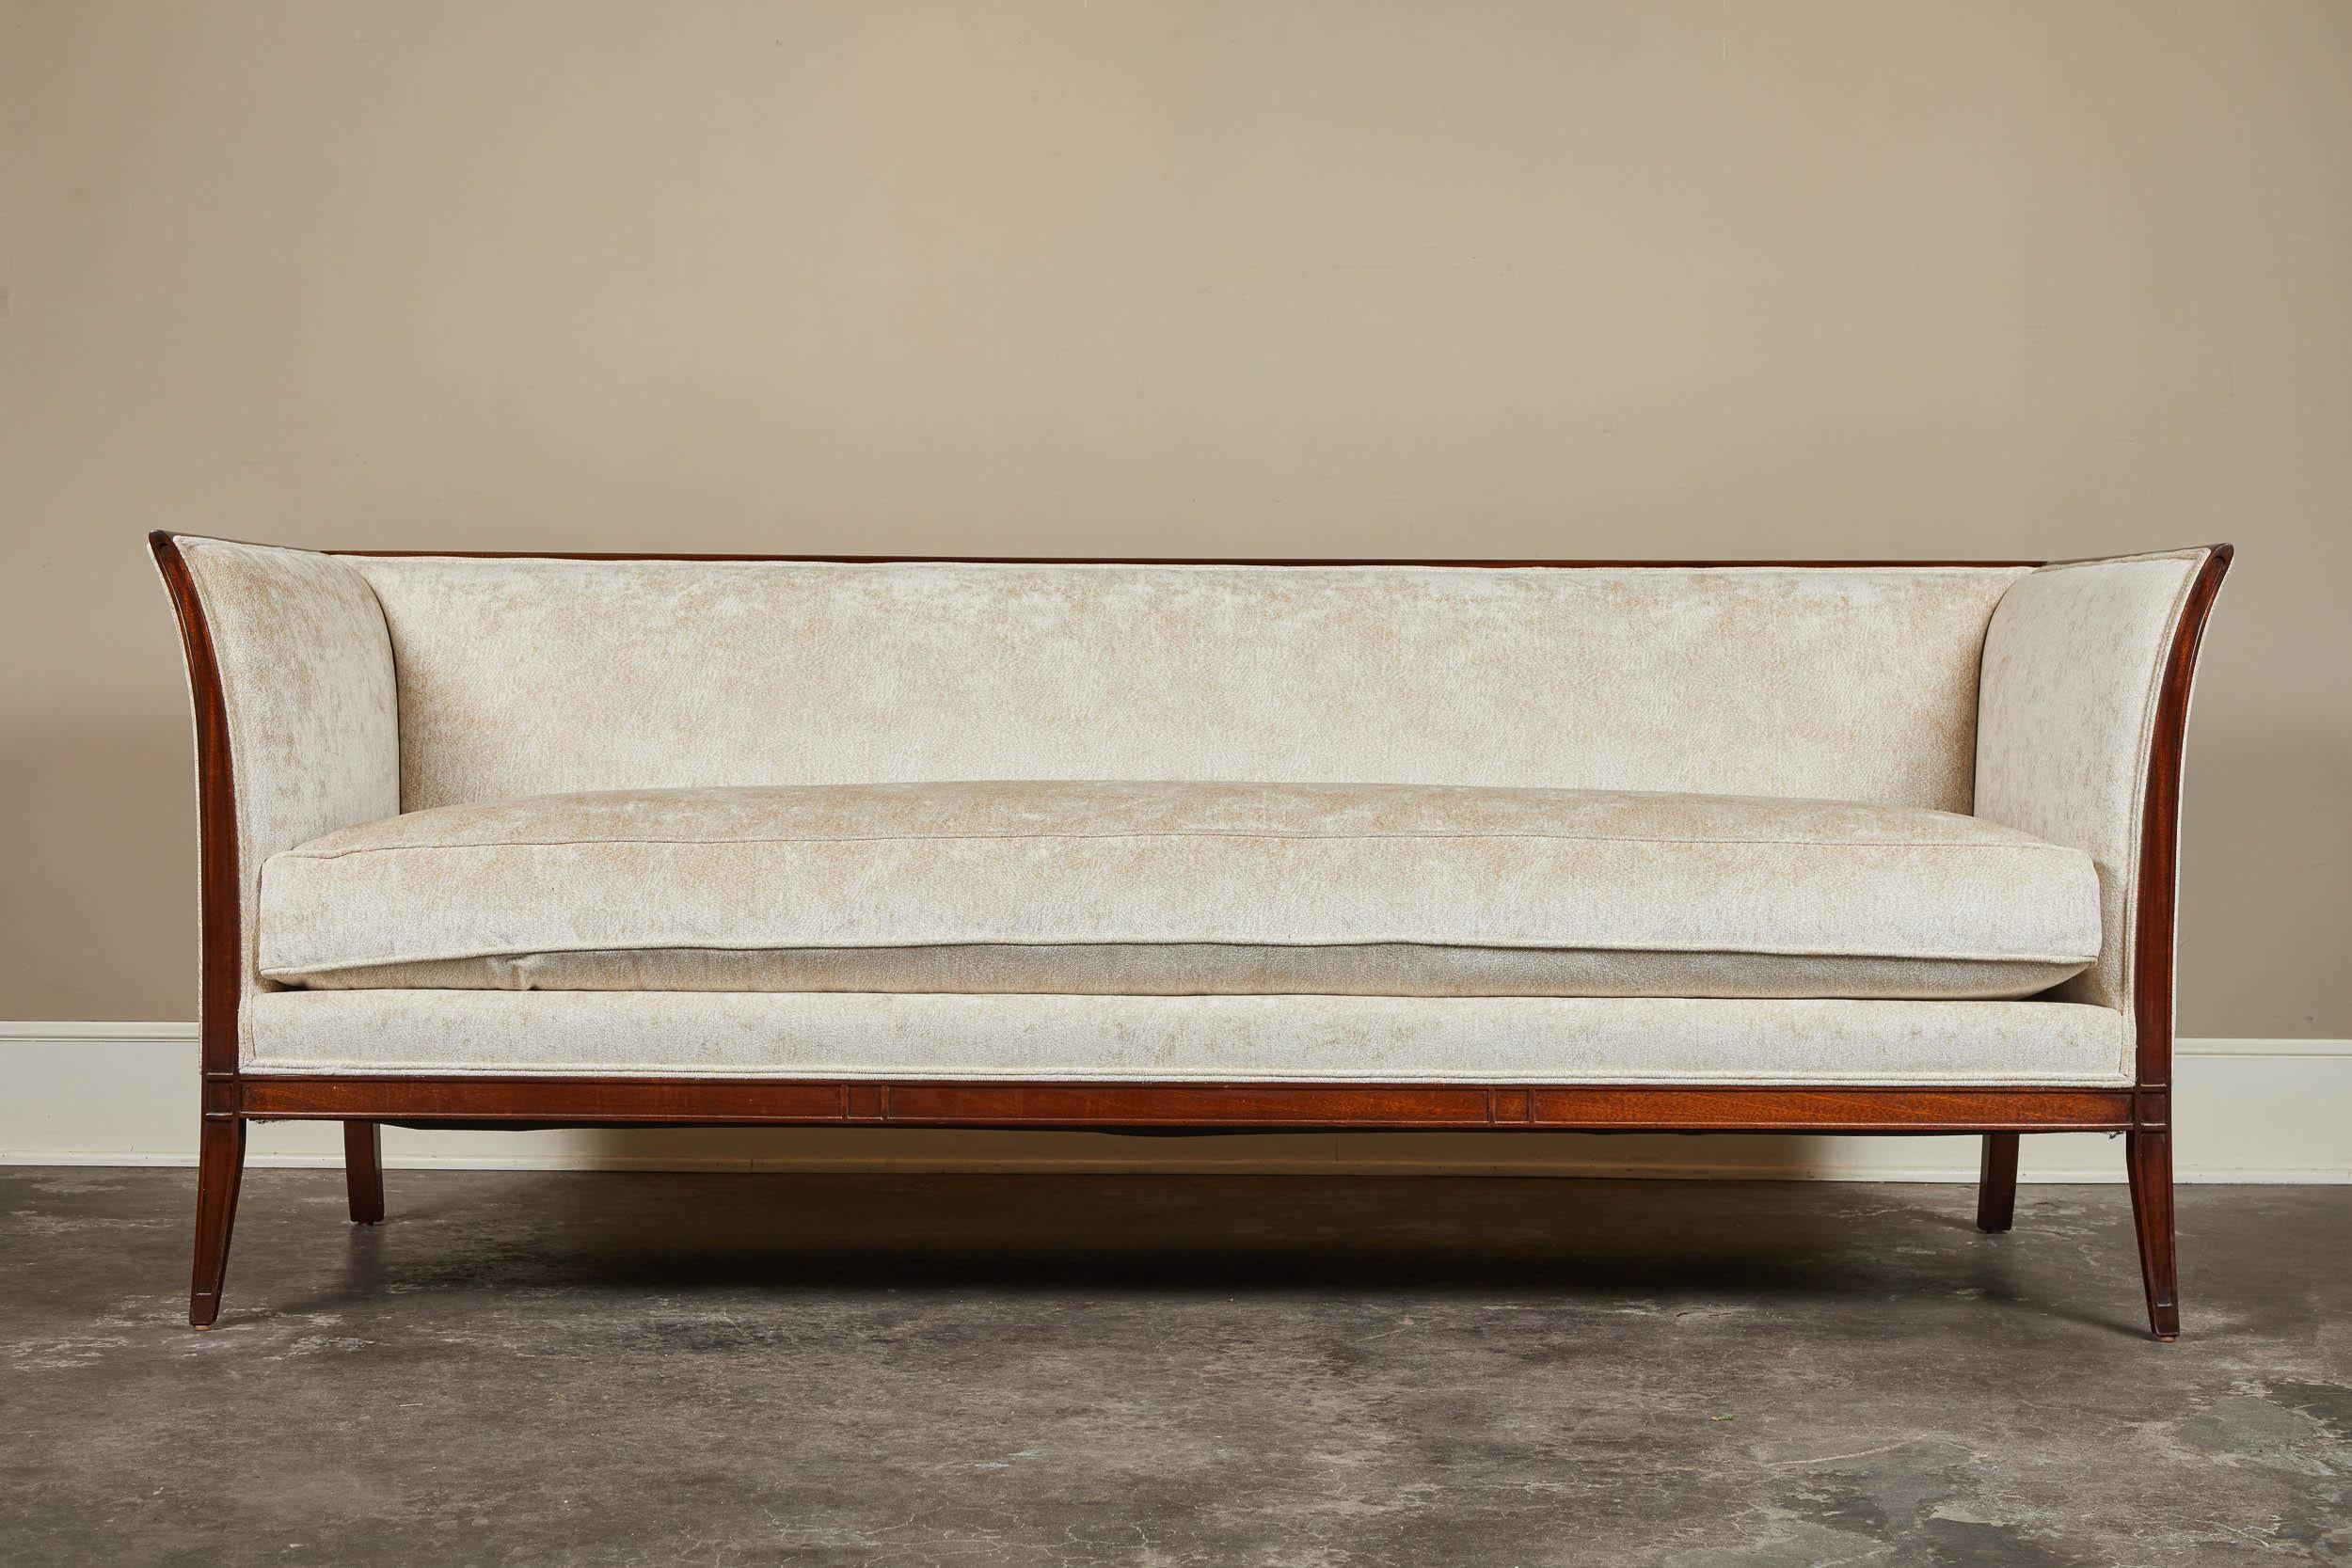 Our Albert sofa with mahogany trim. Recalling the neoclassical style of Sweden’s Gustavian era, this modern sofa features clean lines and a simple exposed frame of mahogany. The gently curved lines of the closed back and arms are carried downwards